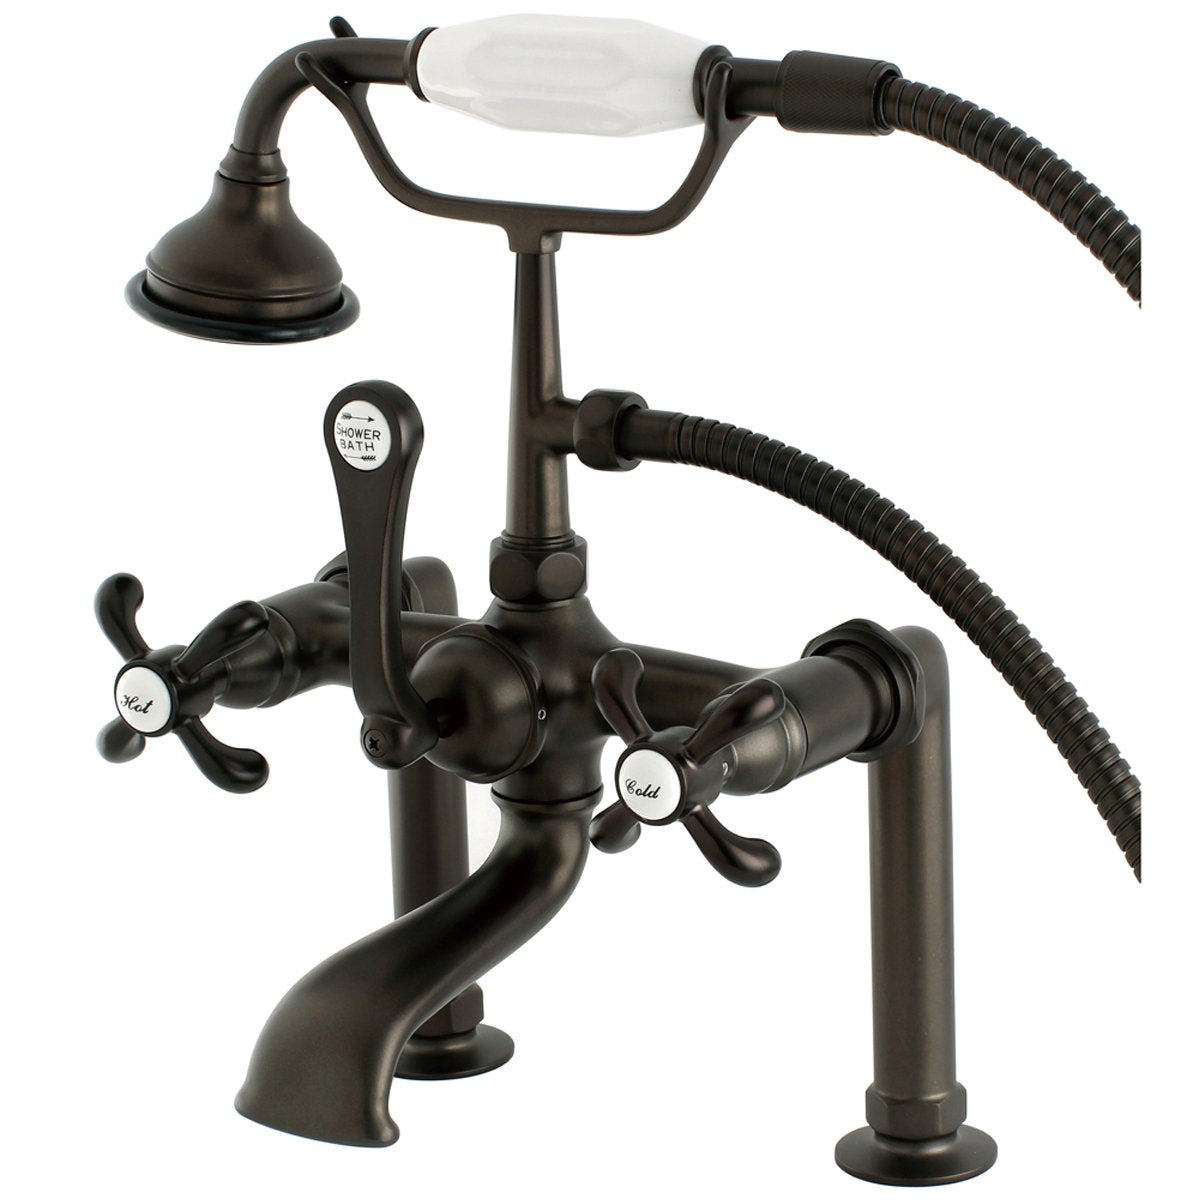 Kingston Brass Aqua Eden AE103T5TX French Country Deck Mount Clawfoot Tub Faucet in Oil Rubbed Bronze-Tub Faucets-Free Shipping-Directsinks.